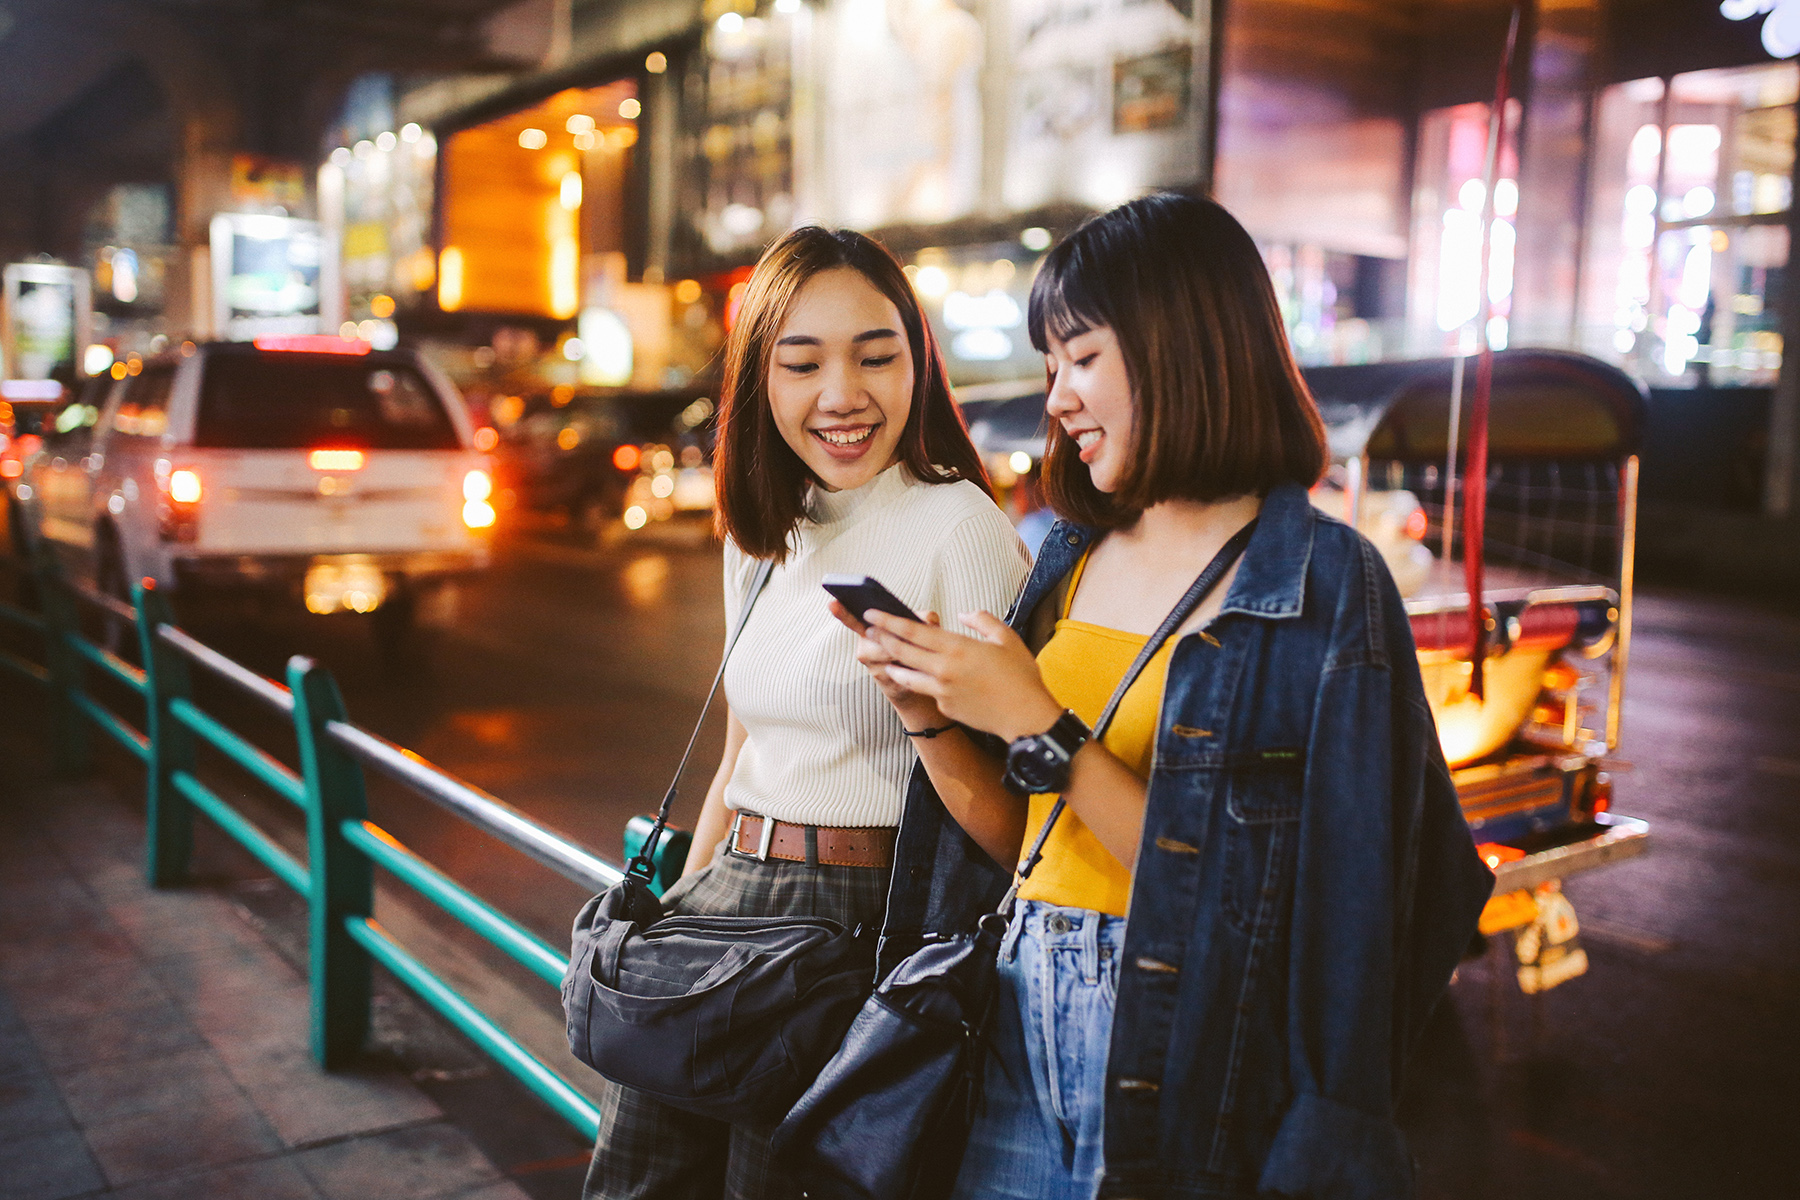 Two young women leaning against a sidewalk railing, smiling and texting on their phone

